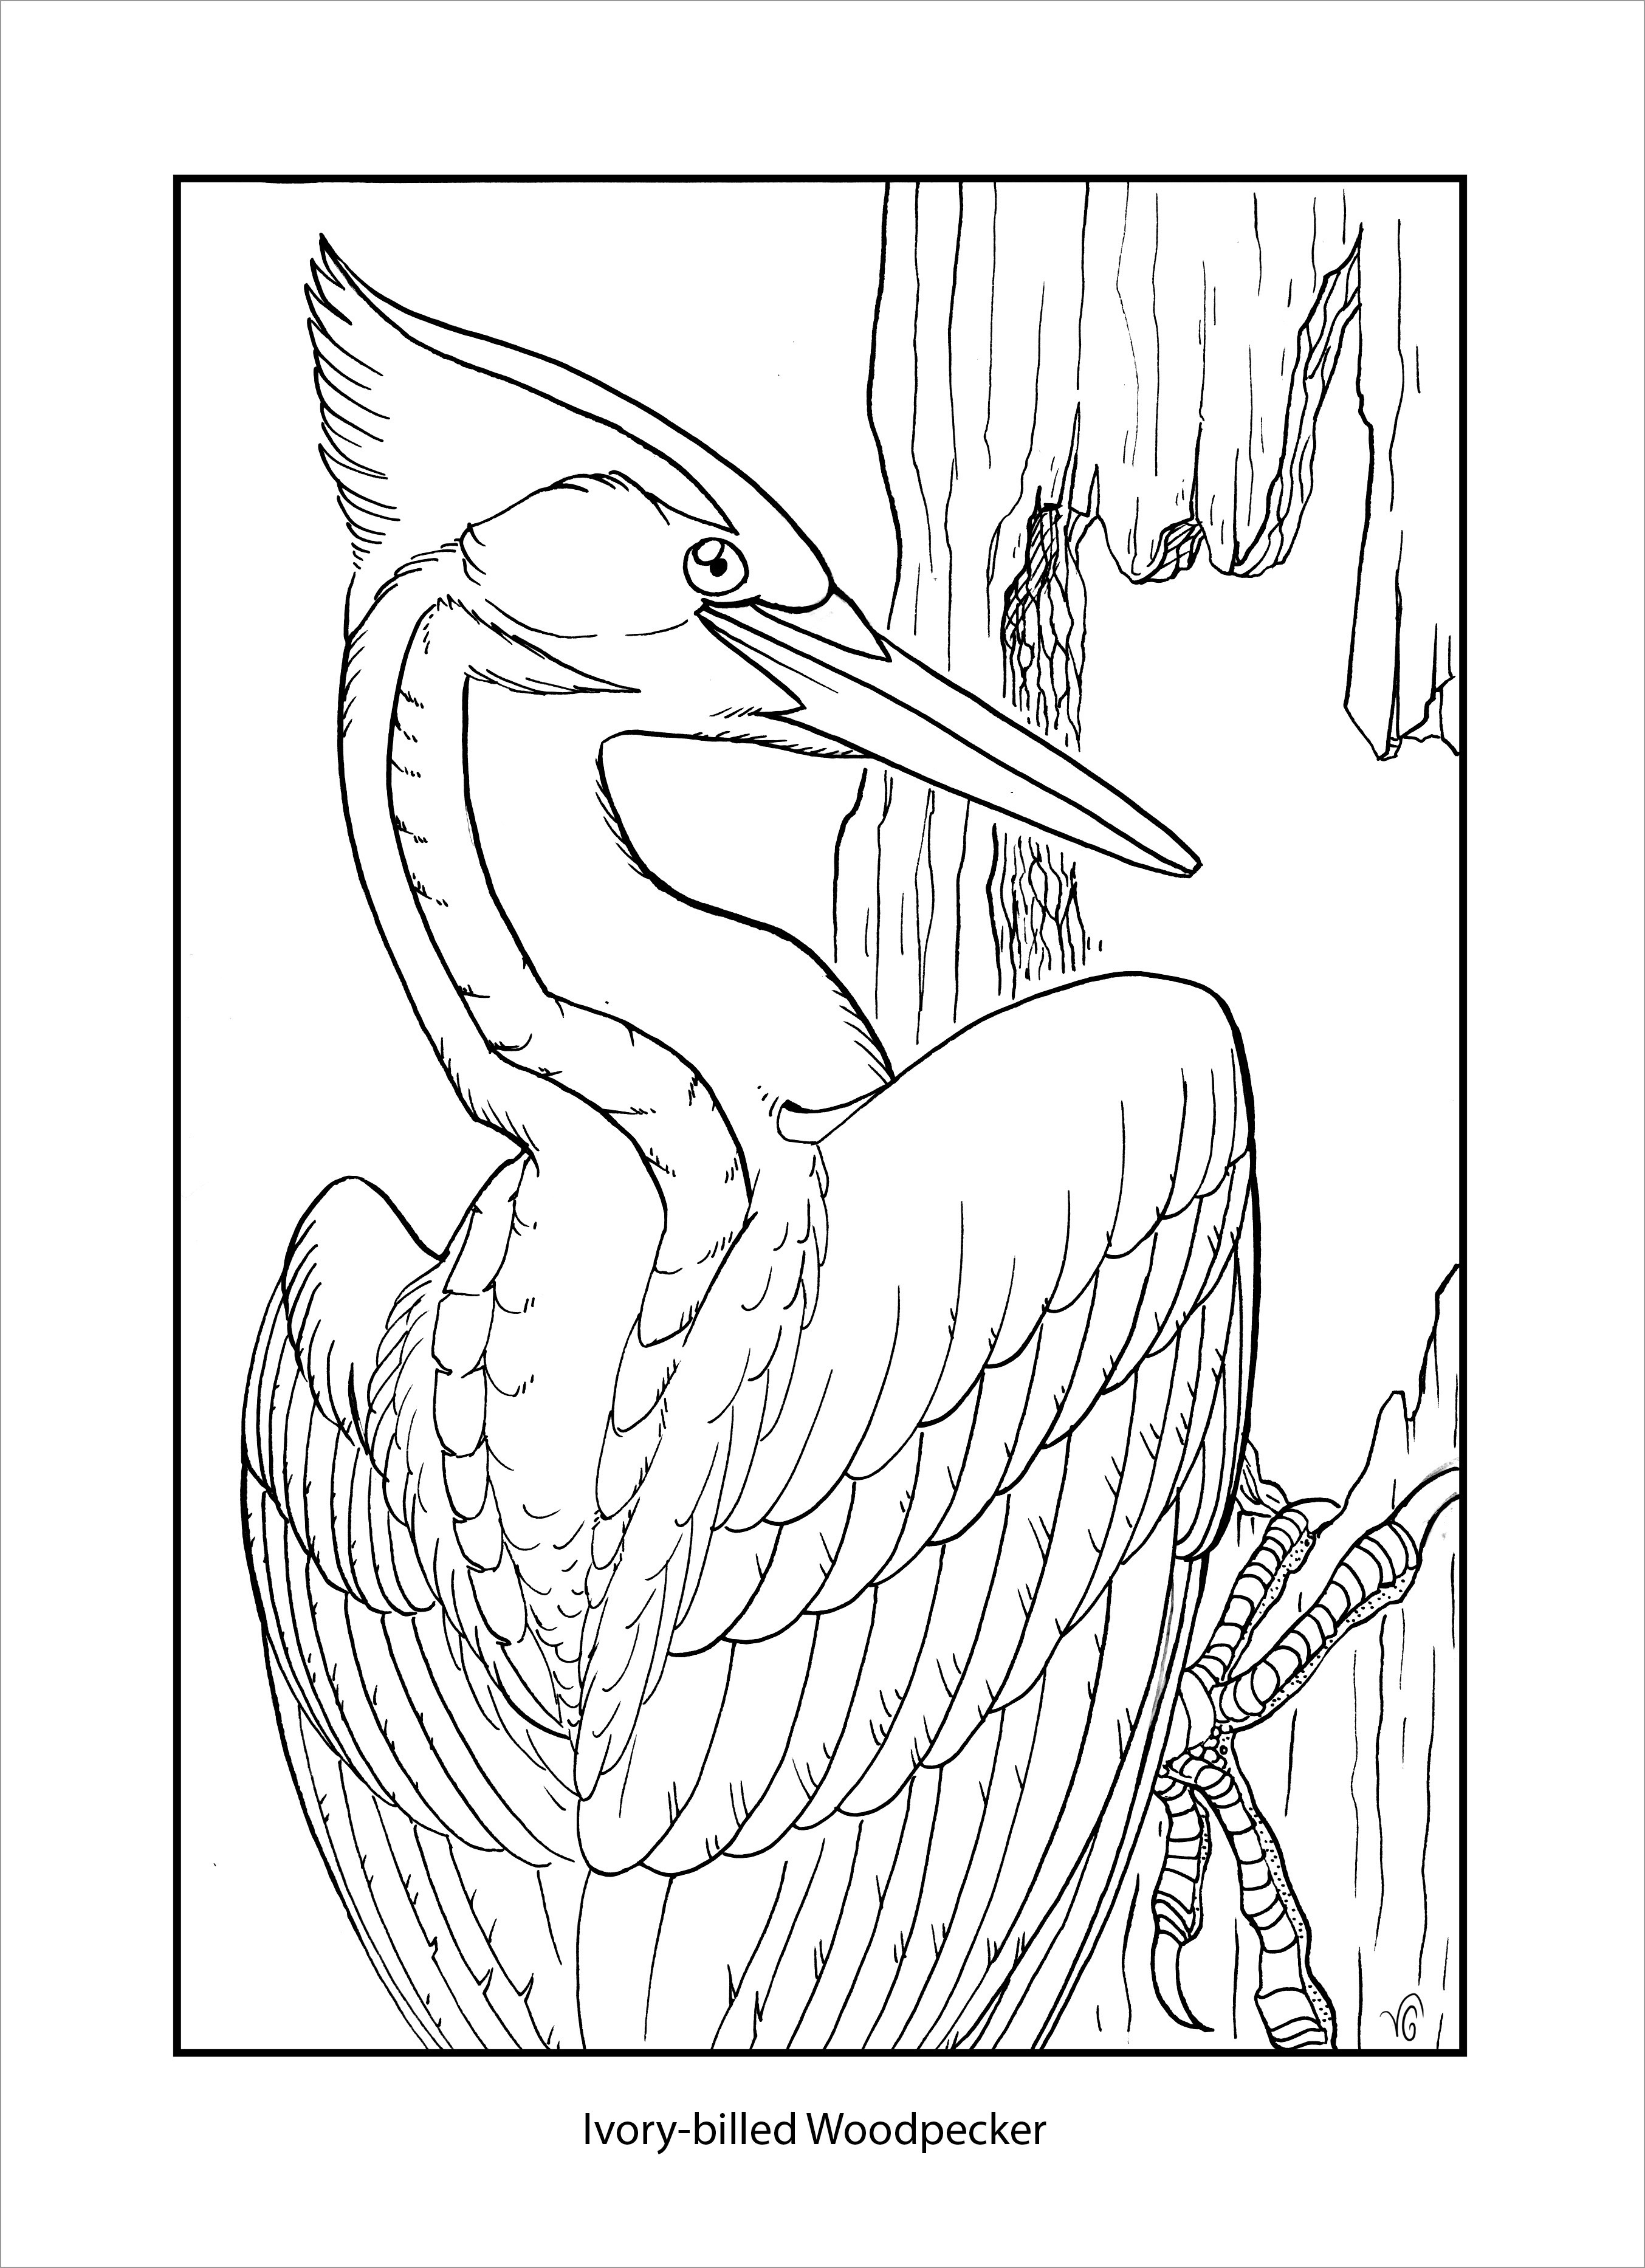 Ivory-billed Woodpecker Coloring Page for Kids